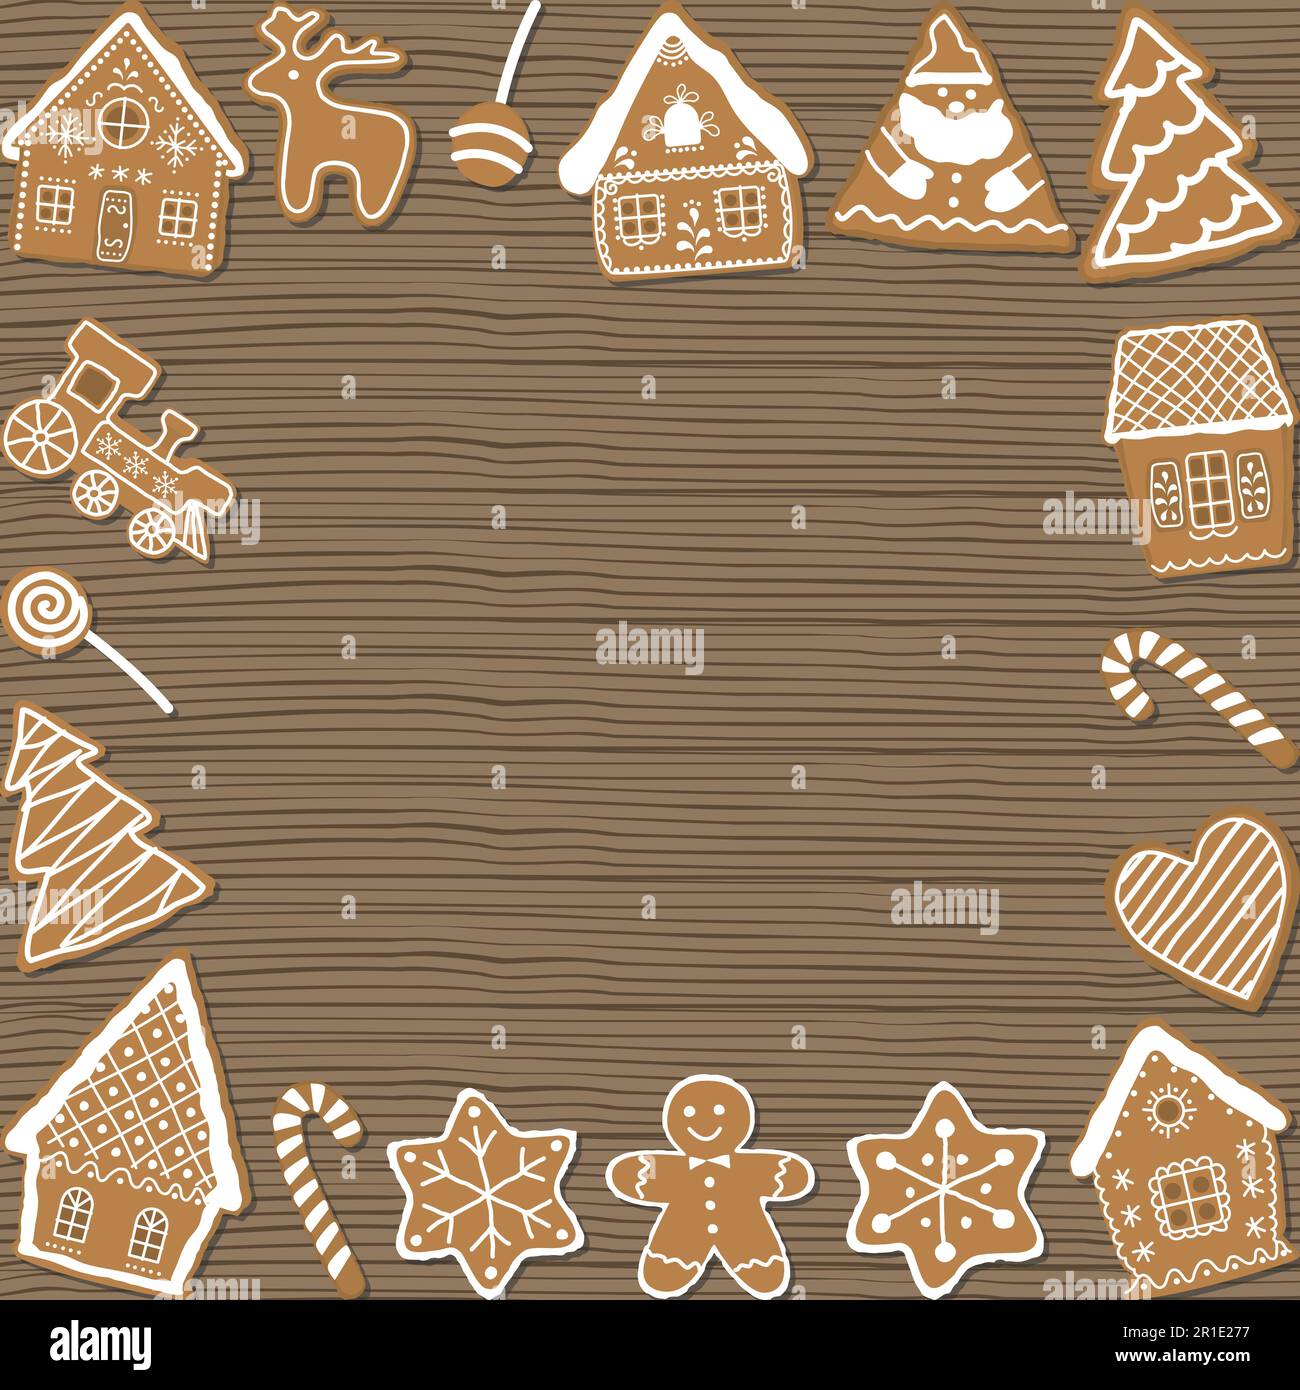 Christmas cookies on wooden background. Holiday background. Gingerbread houses, Santa Claus, deer, fir trees, gingerbread man, train, stars, heart. Ve Stock Vector